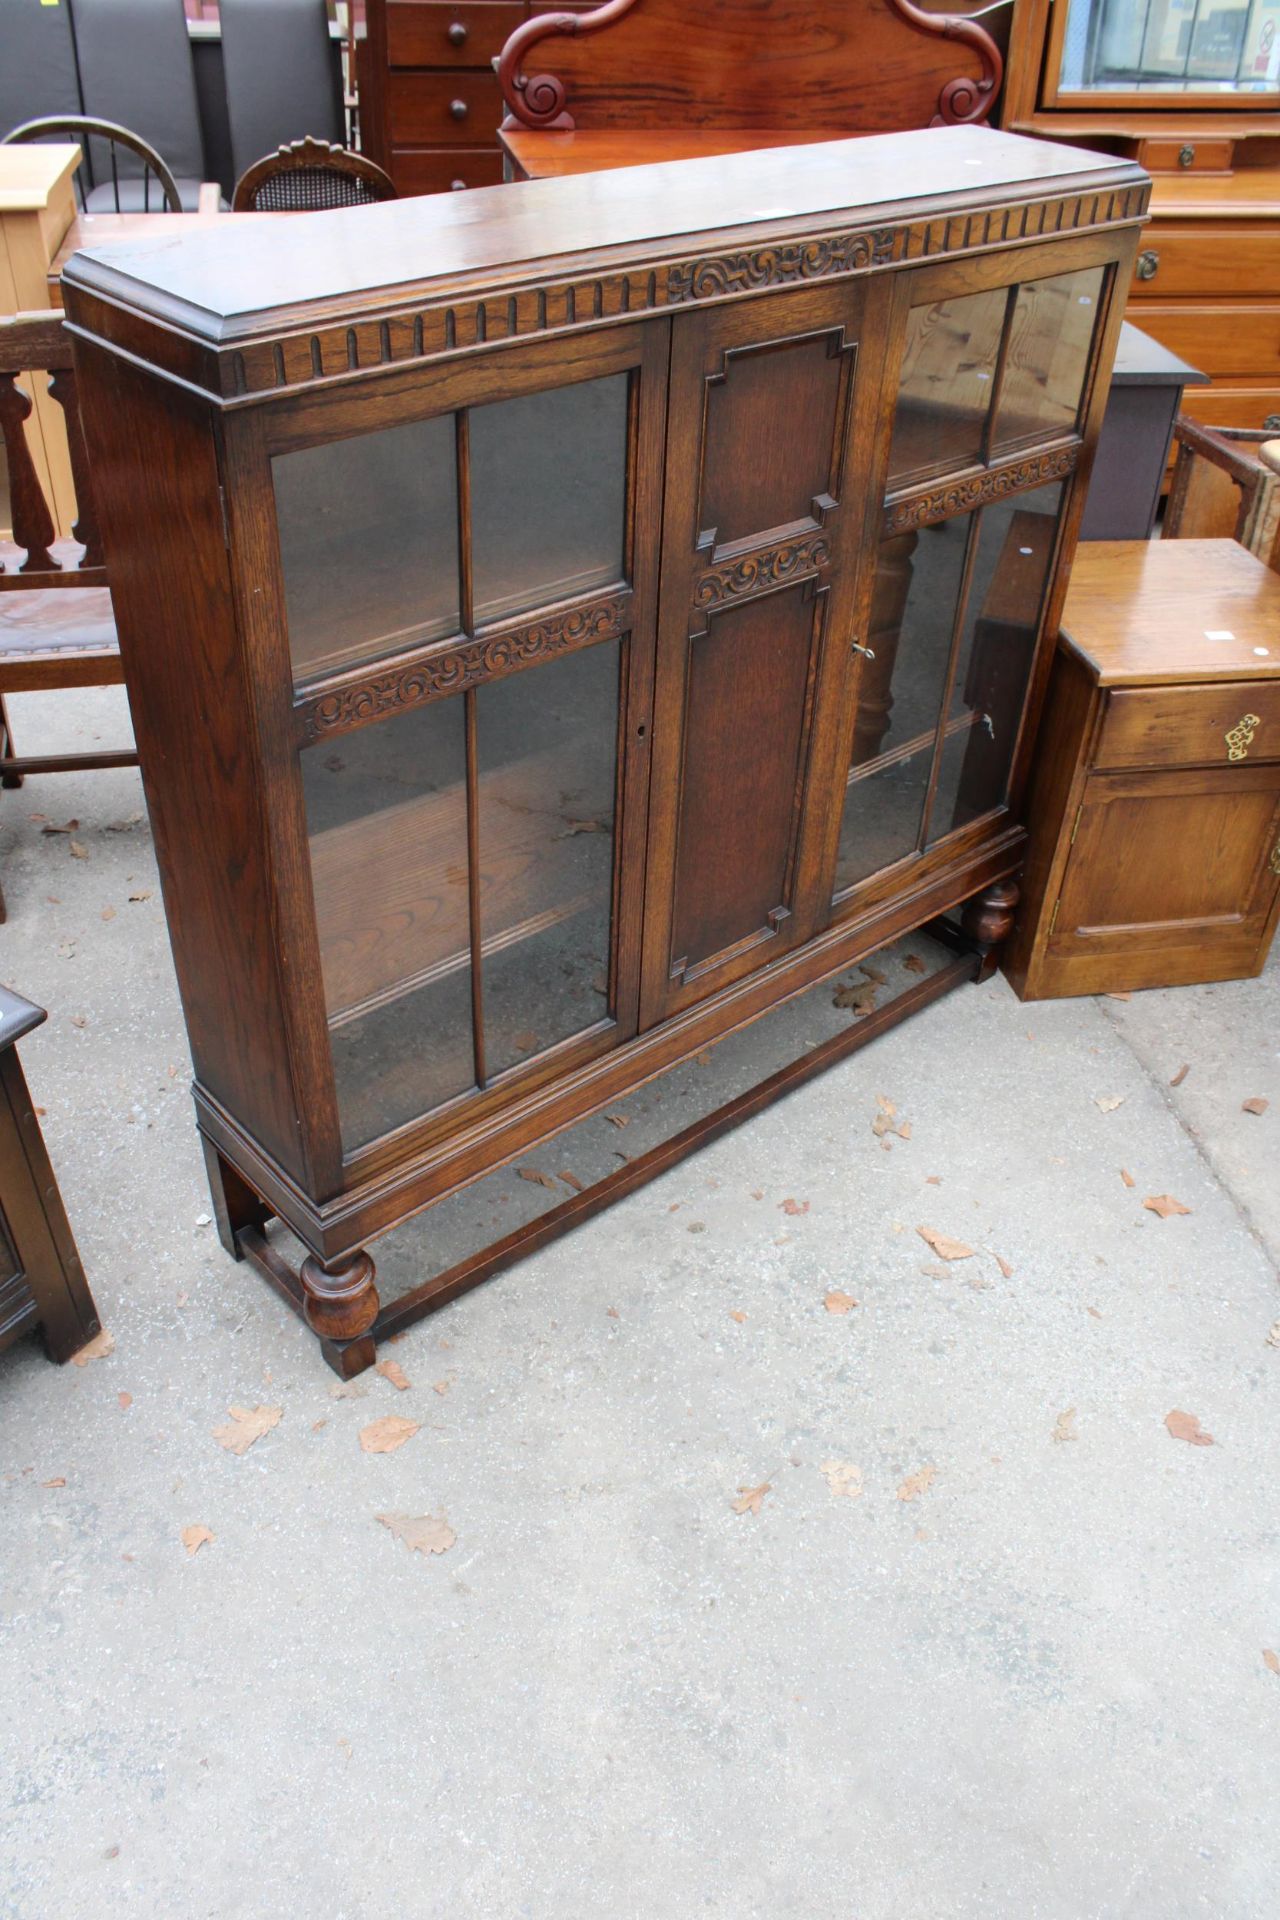 AN EARLY 20TH CENTURY OAK TWO DOOR DISPLAY CABINET ON OPEN BASE WITH TURNED FRONT LEGS, 48" WIDE